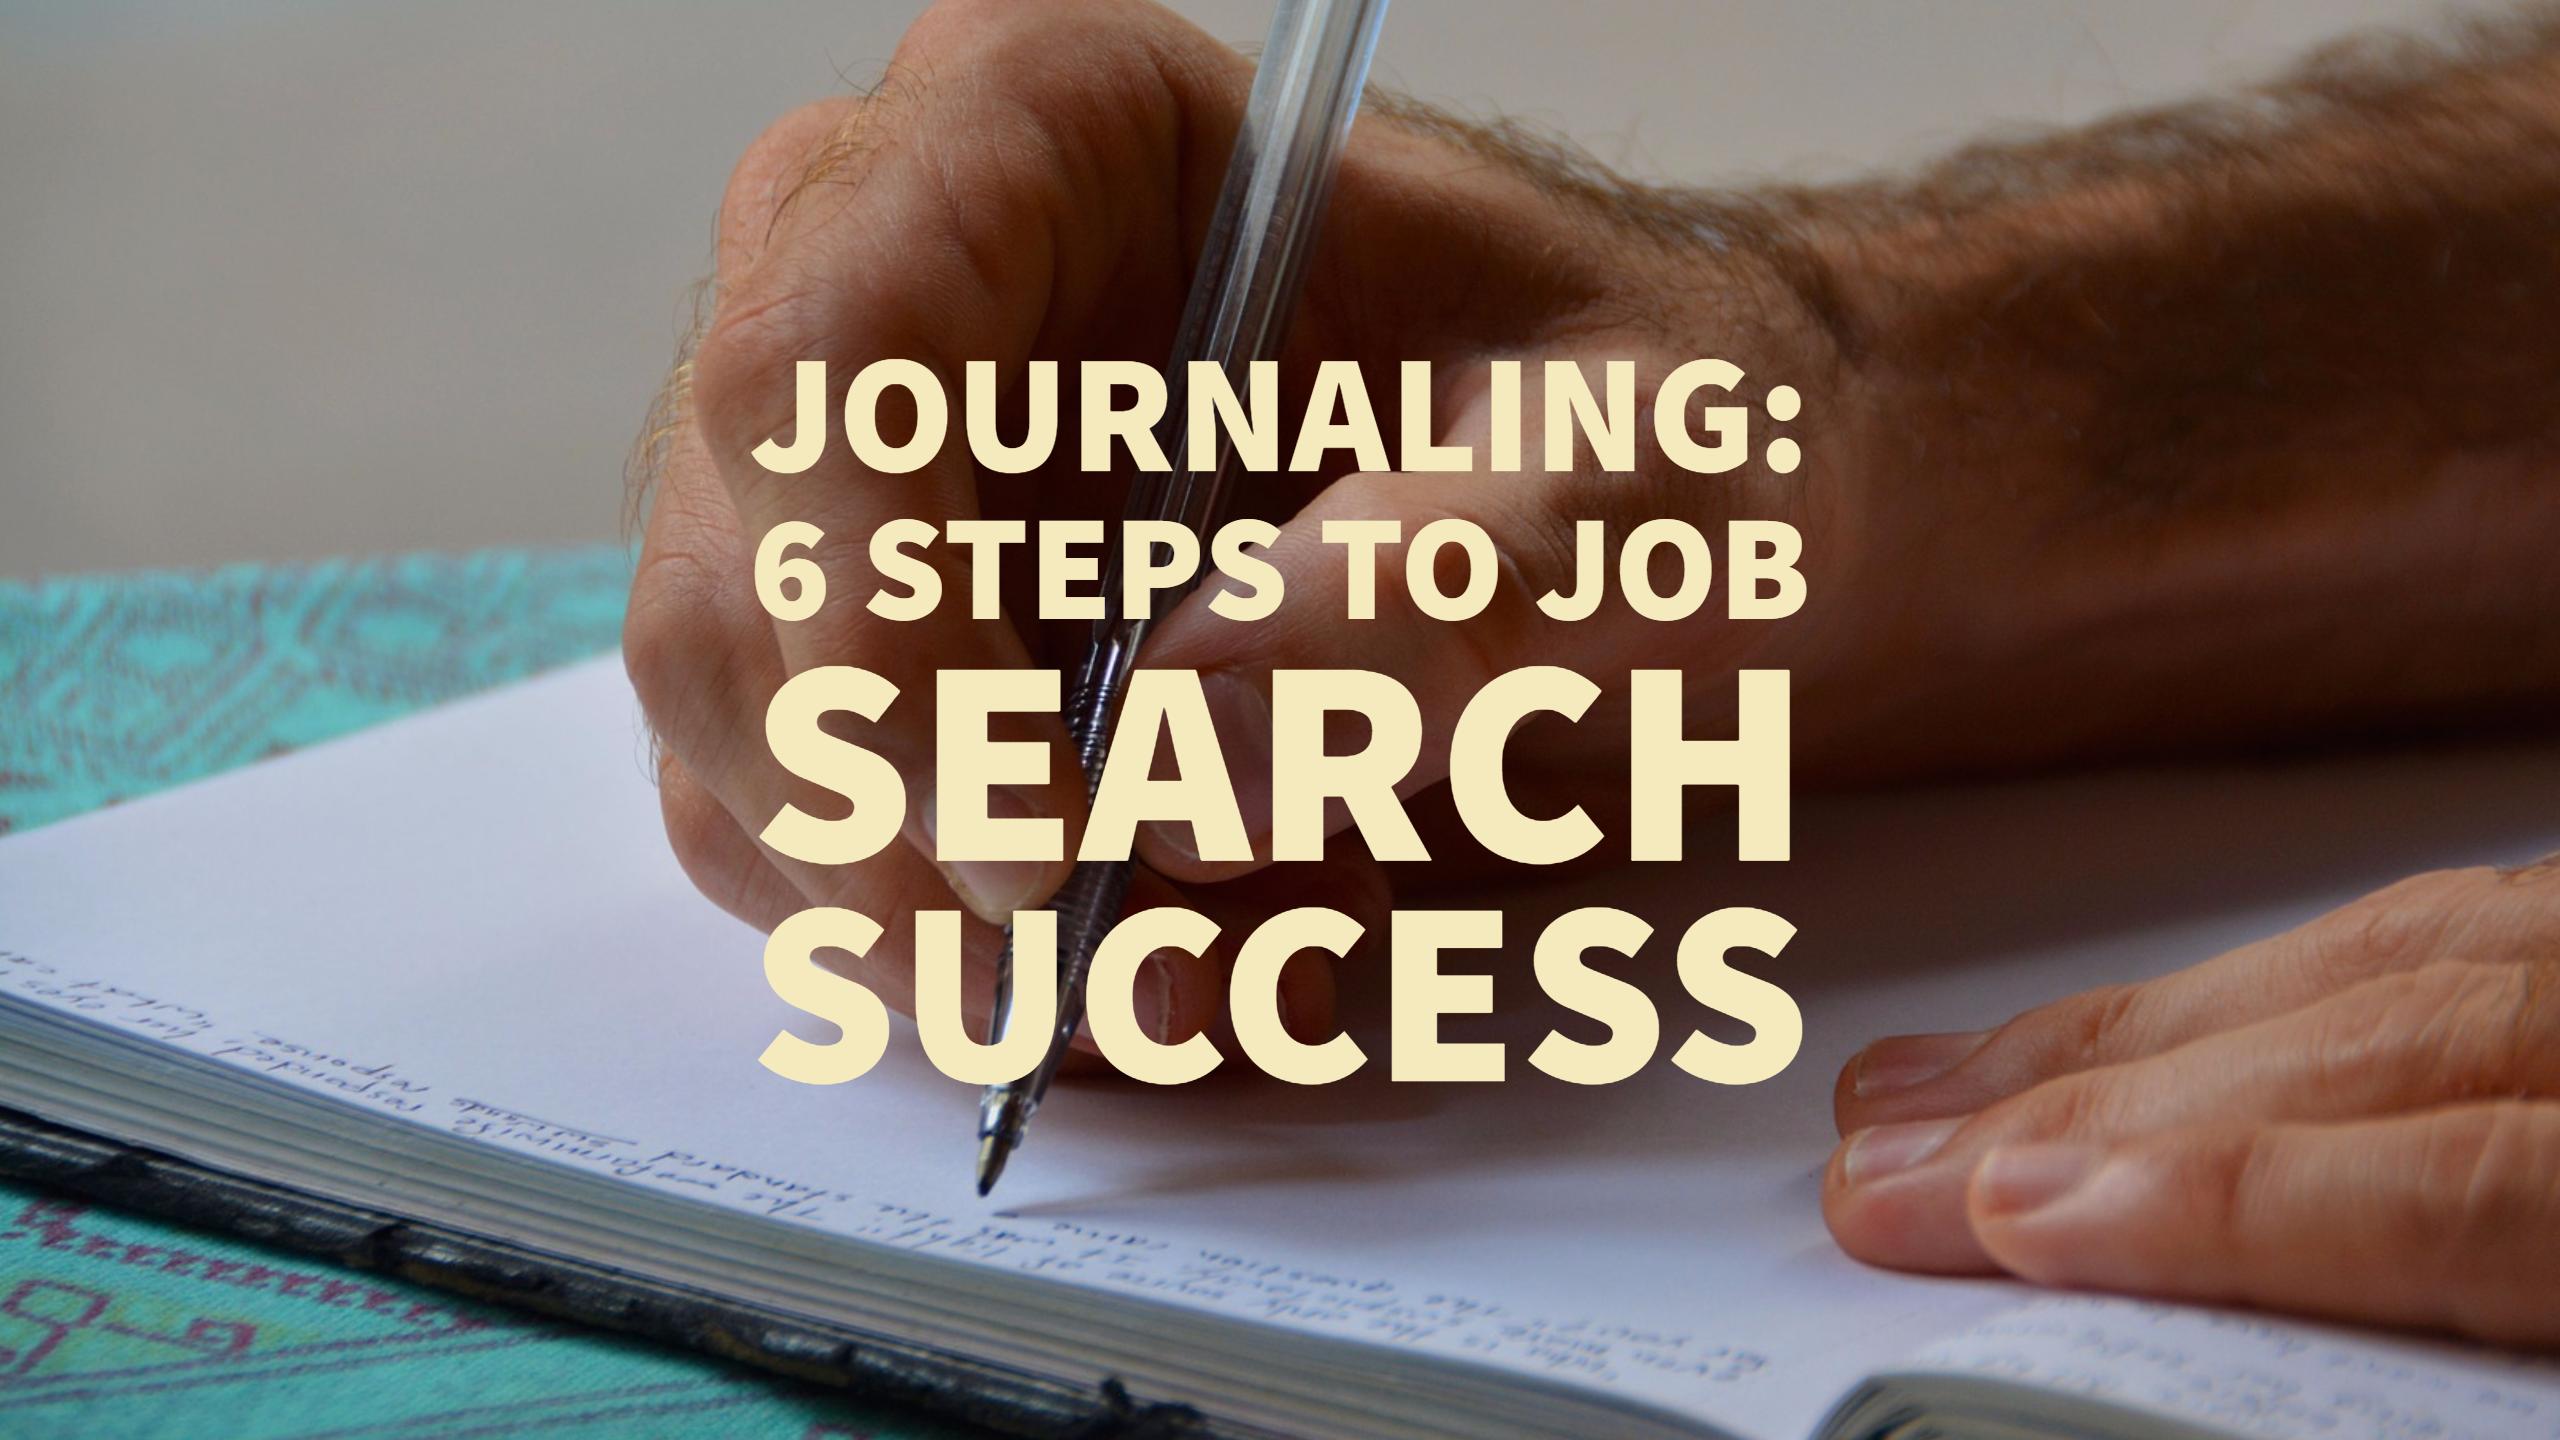 Journaling: 6 Steps to Job Search Success